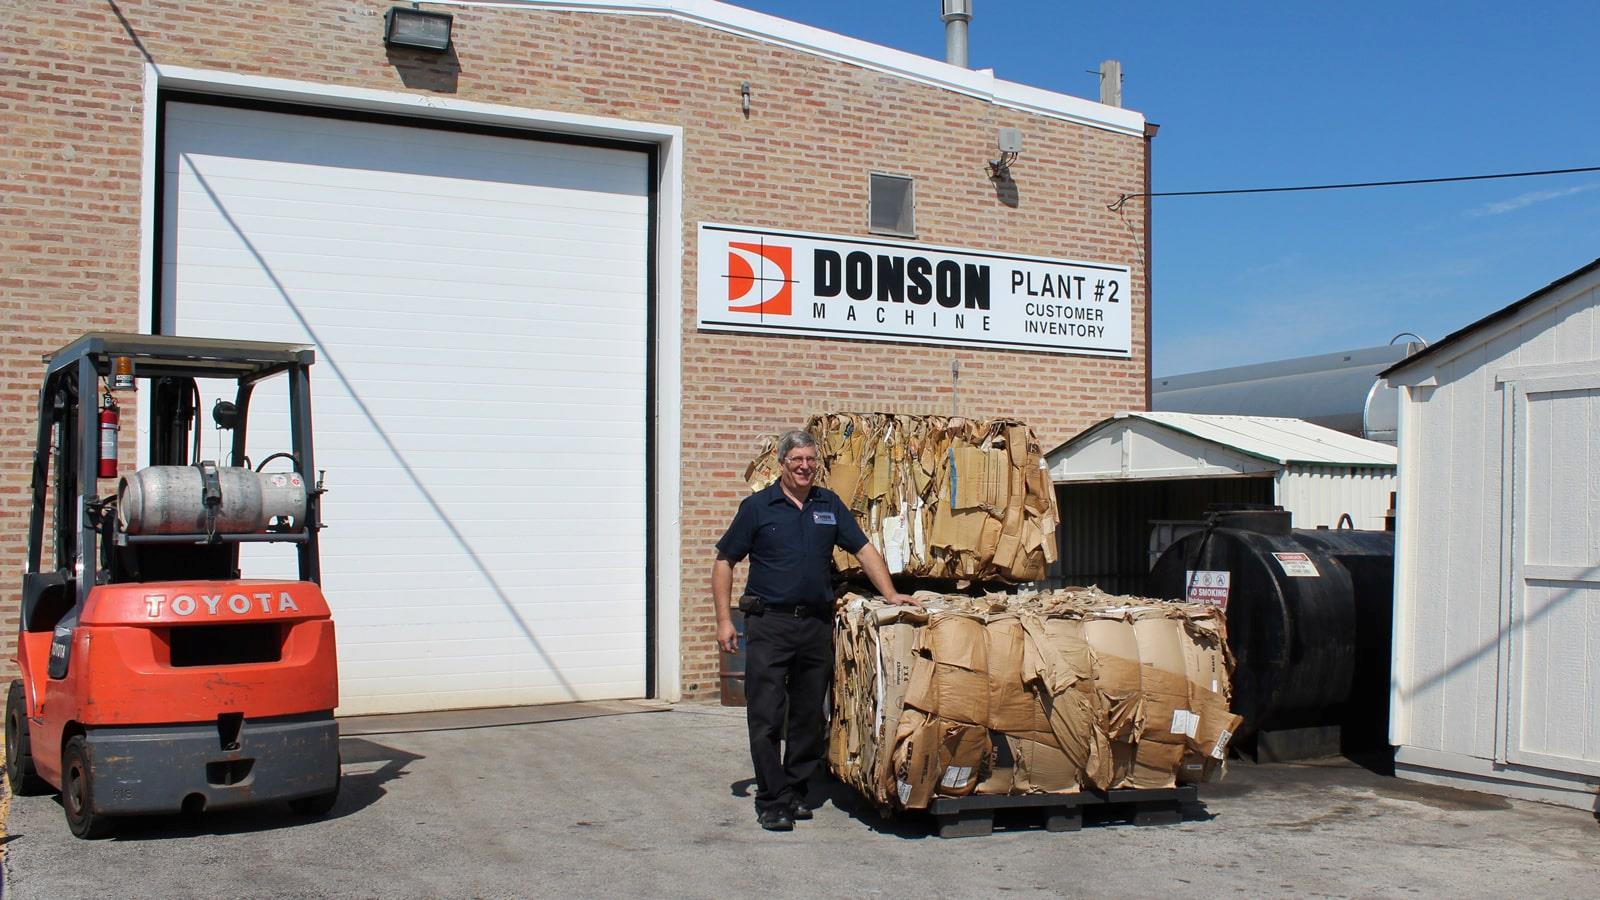 Compacted cardboard bales and fork lift truck at company Donson Machine